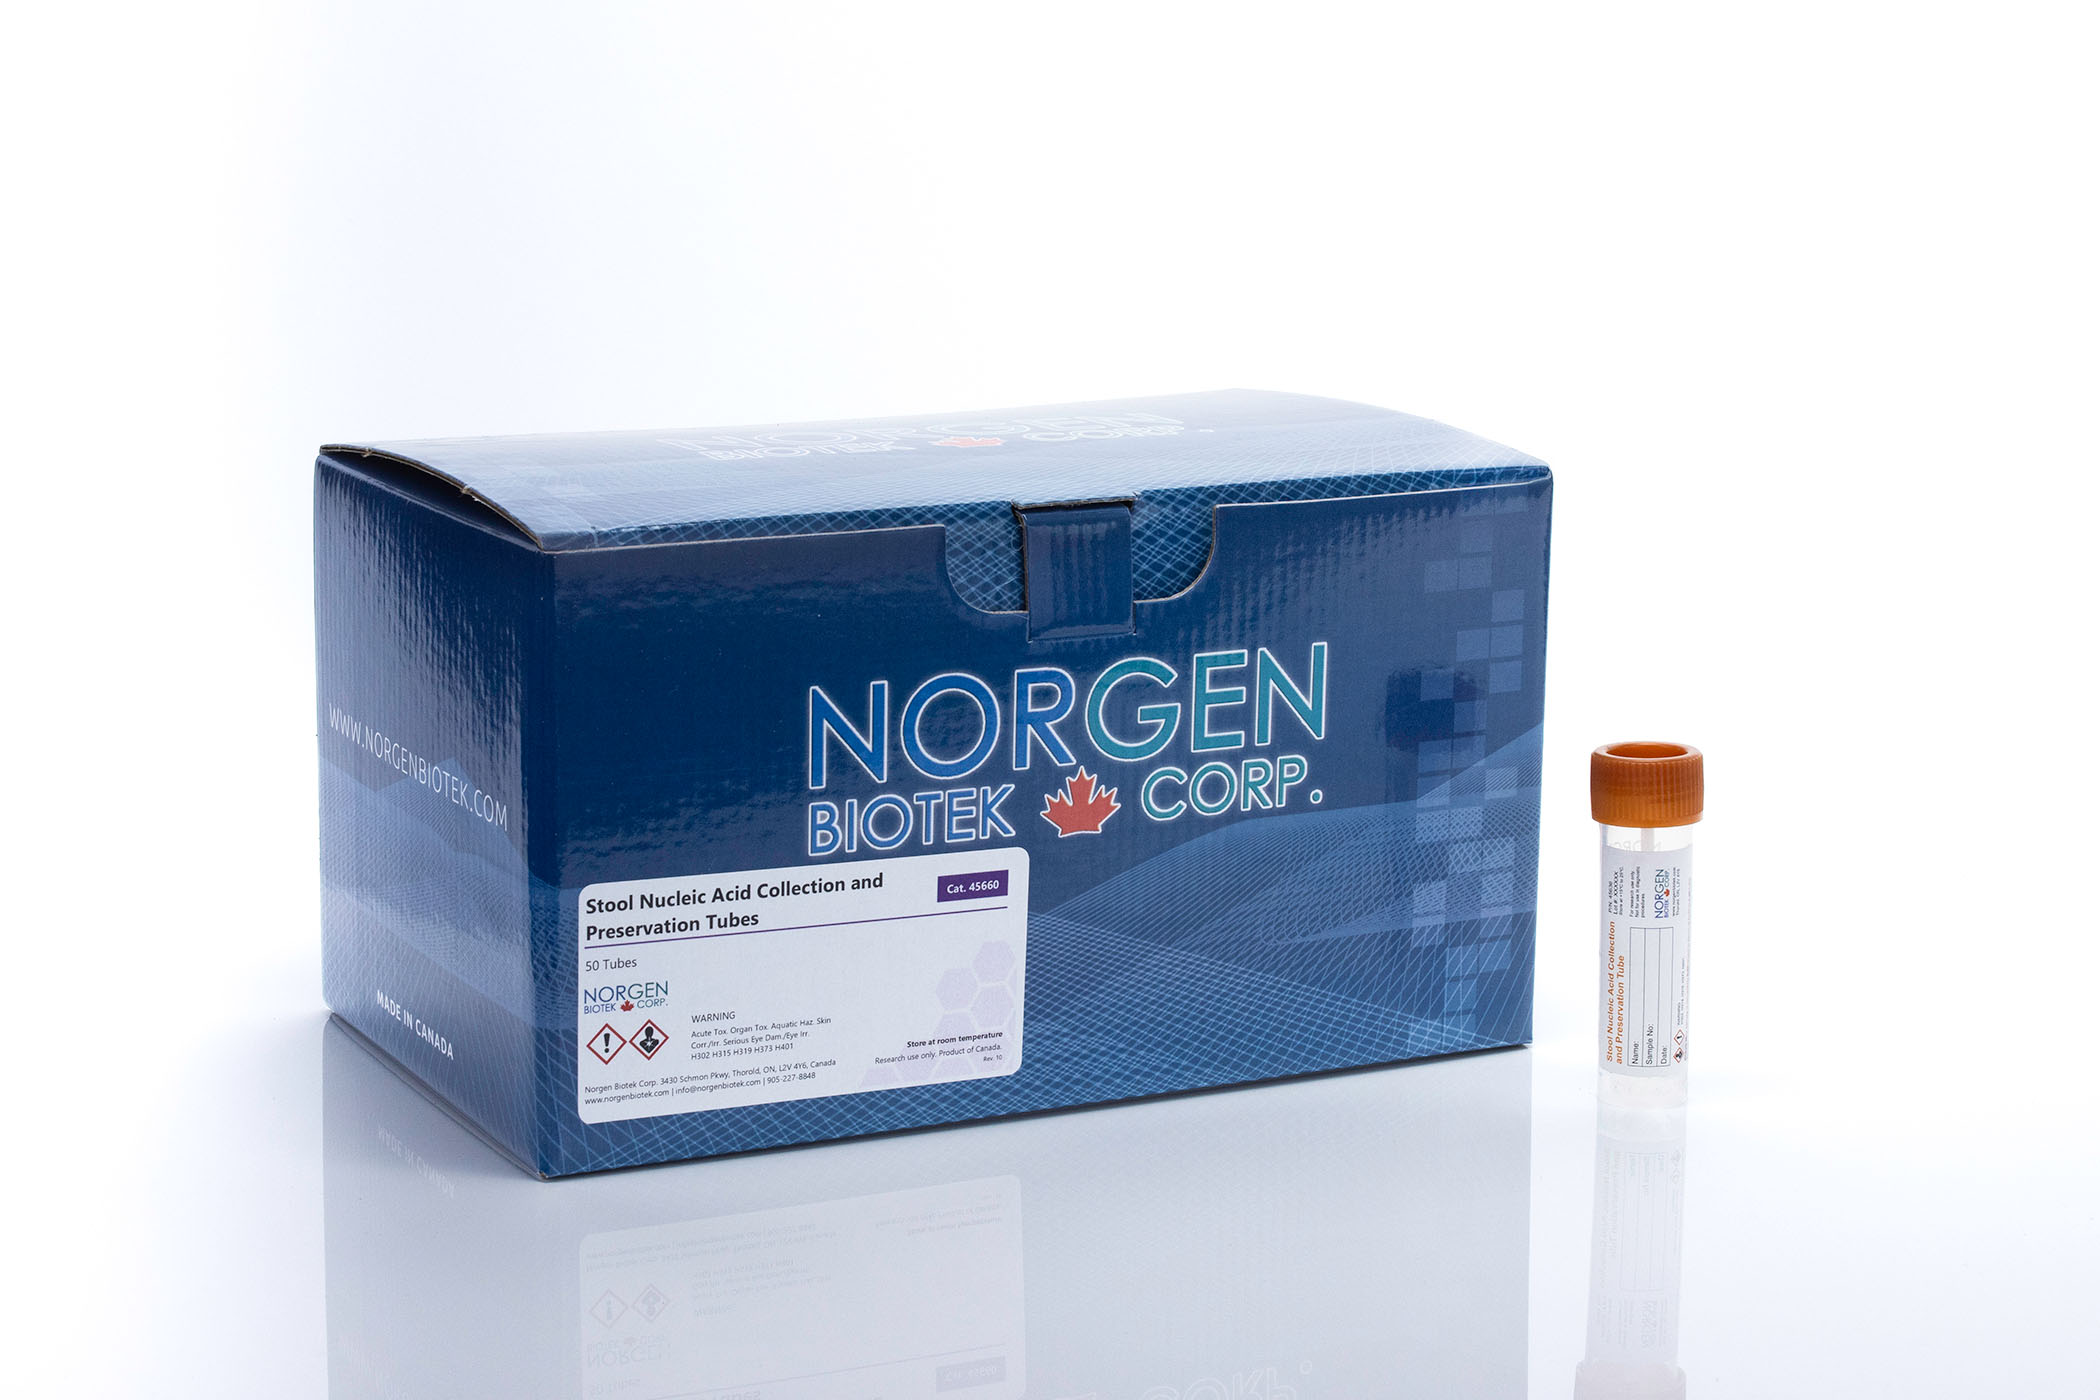 Stool Nucleic Acid Collection and Preservation Tubes